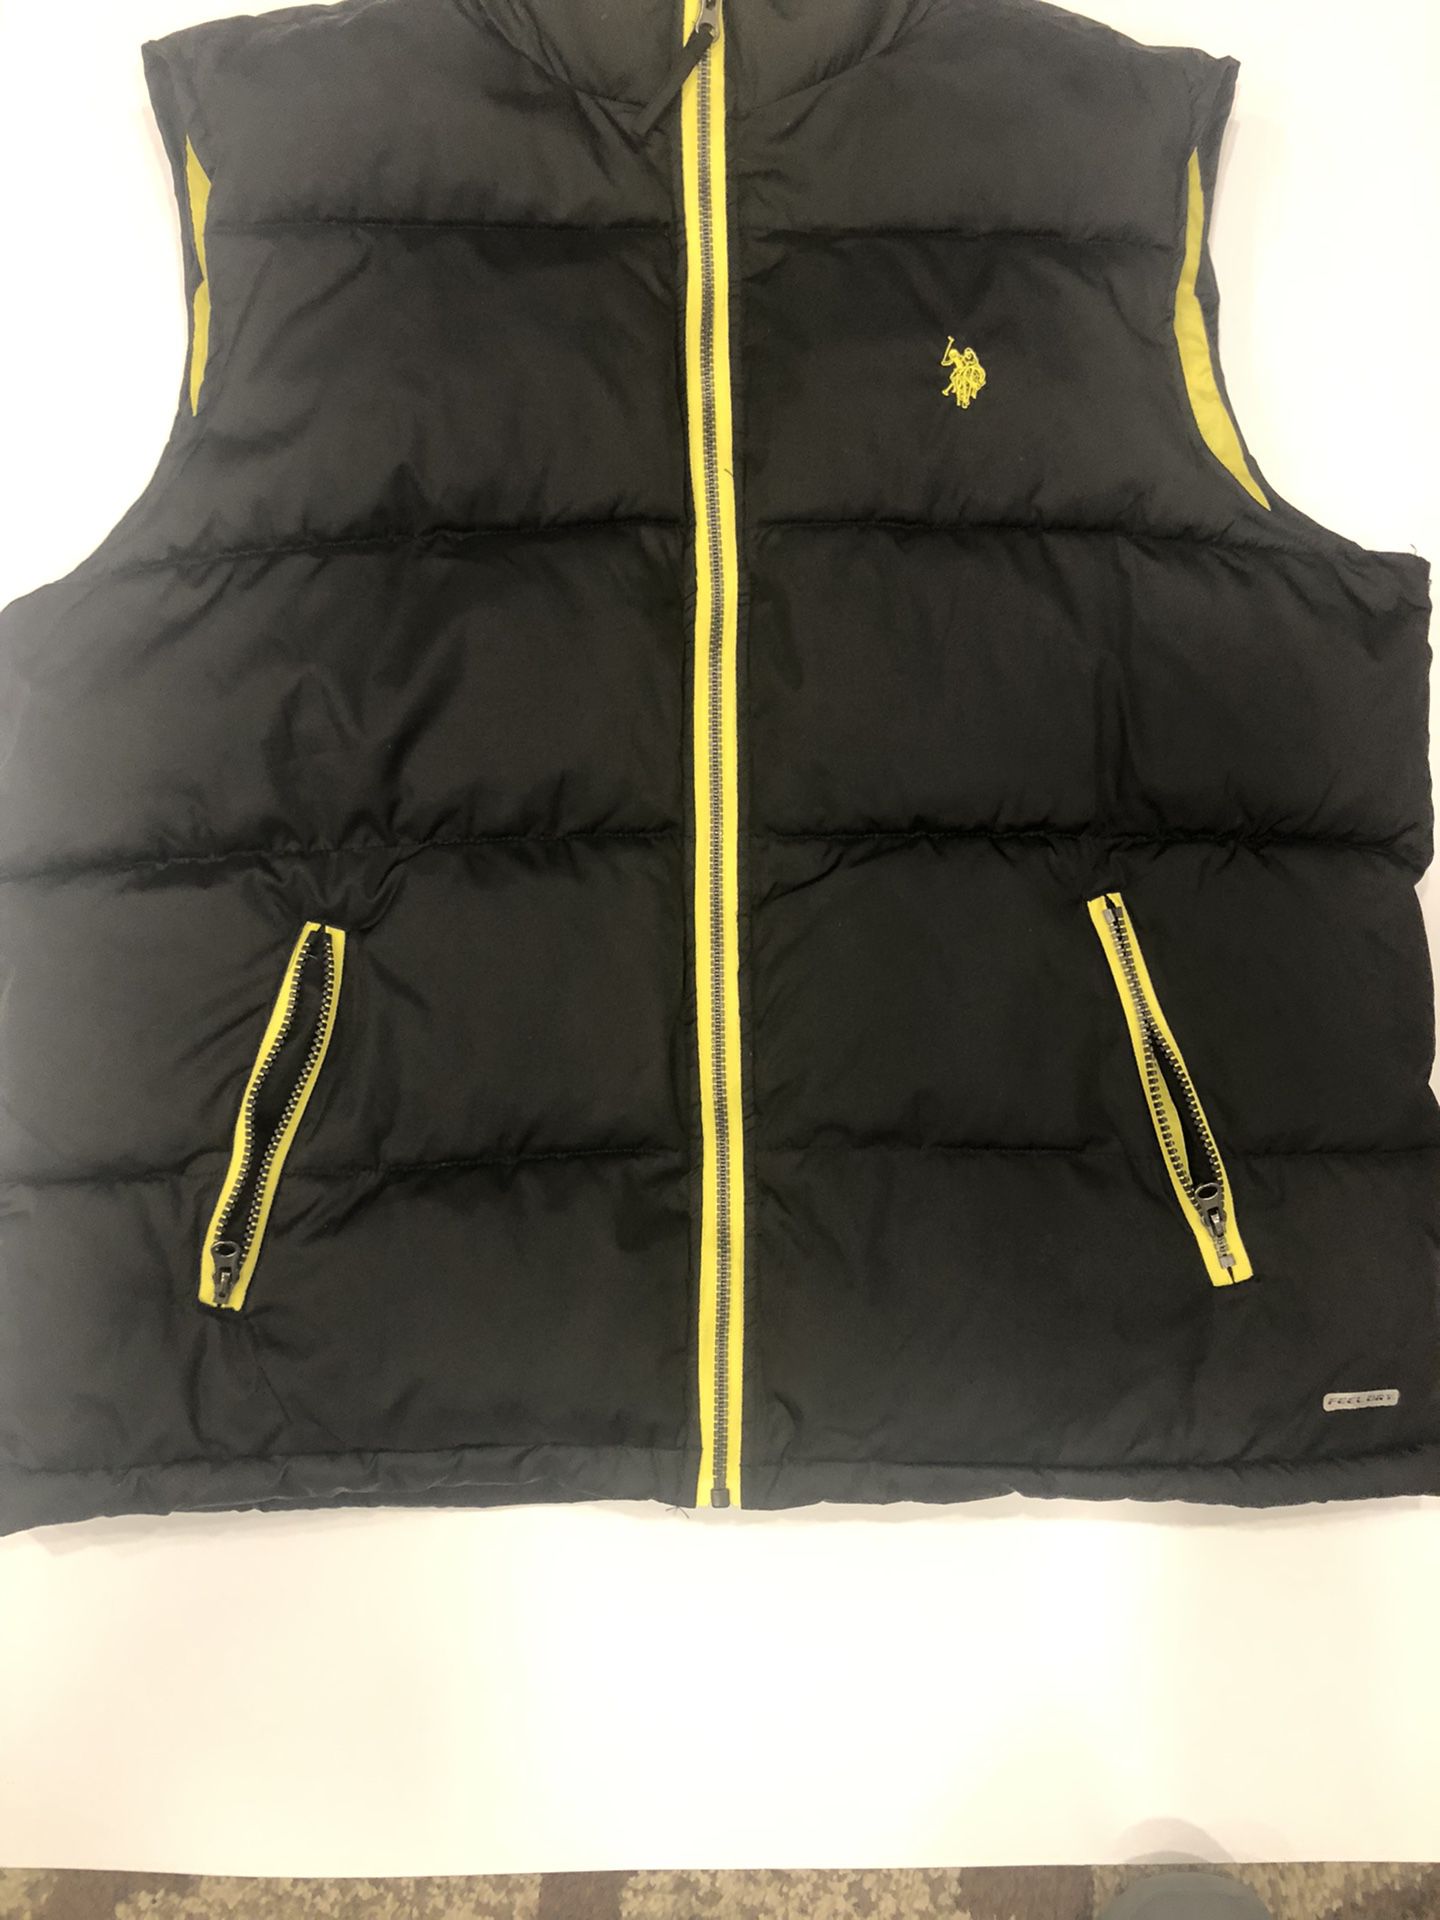 U.S. Polo Assn. Men's Vest Puffer Size Large Black/ Yellow Zippered Front Jacket